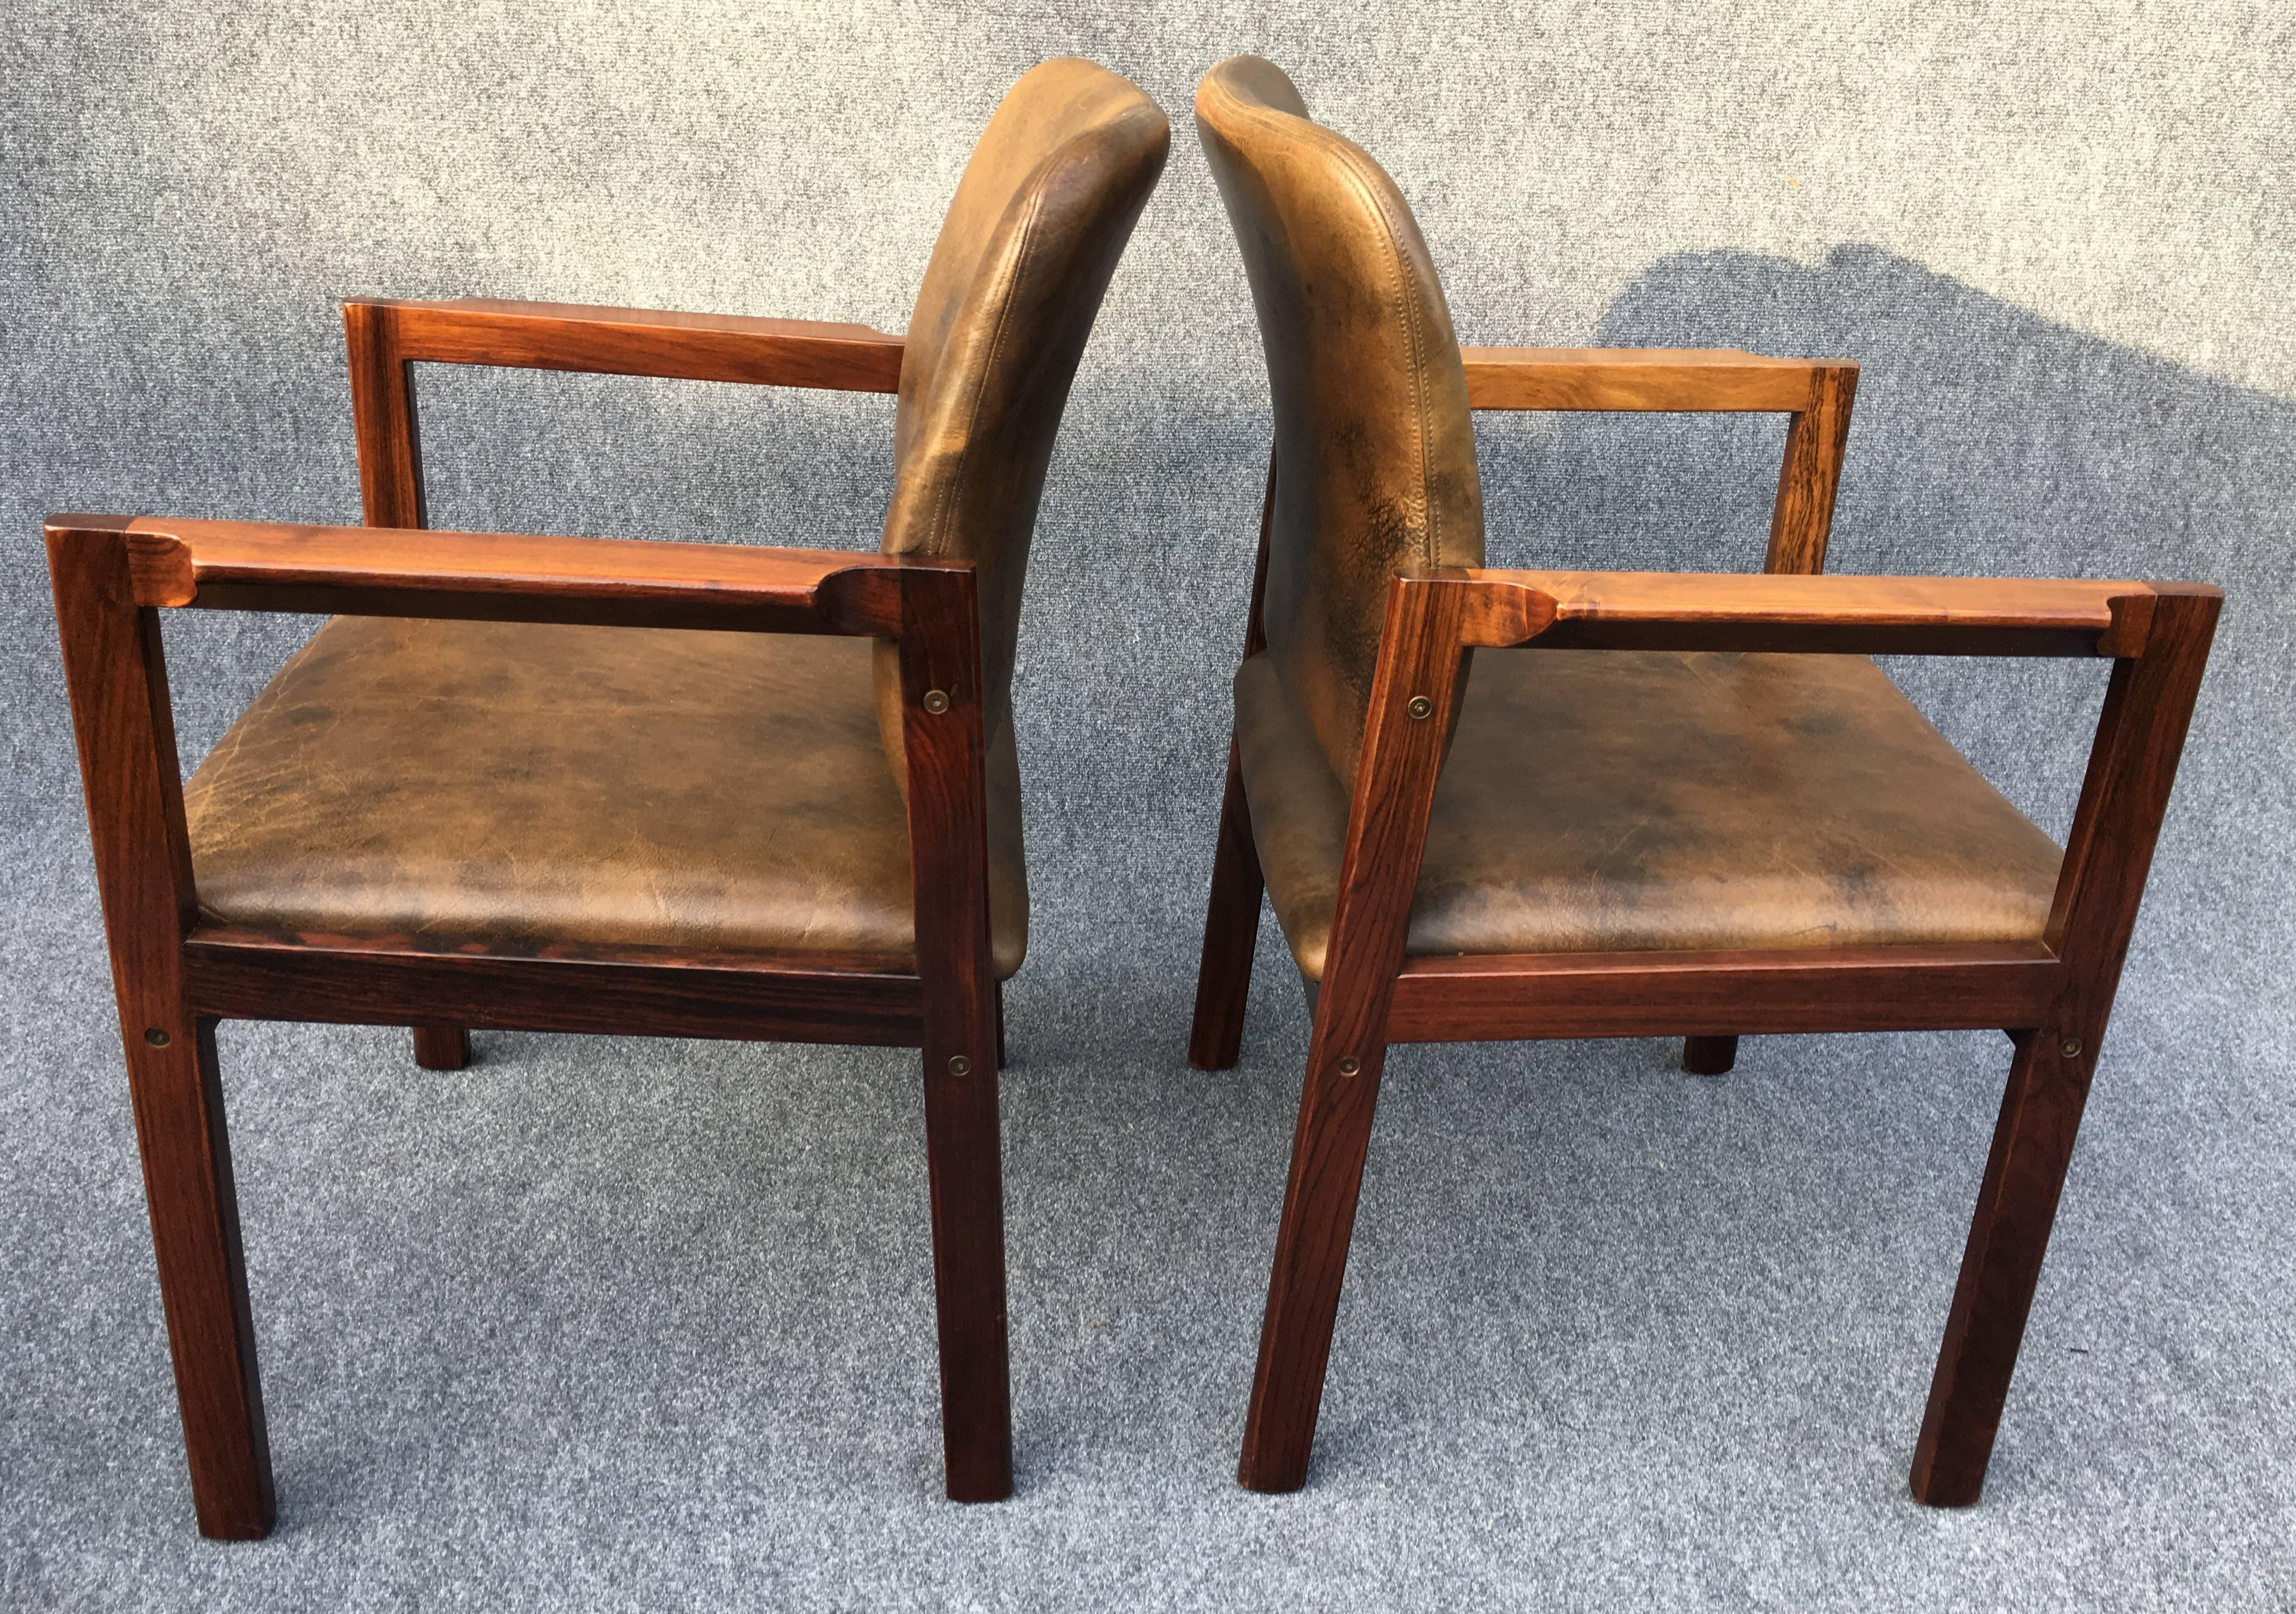 Nice pair of original Mid-Century Danish armchairs by Bjerringbro of Denmark in good condition with original leather upholstery.